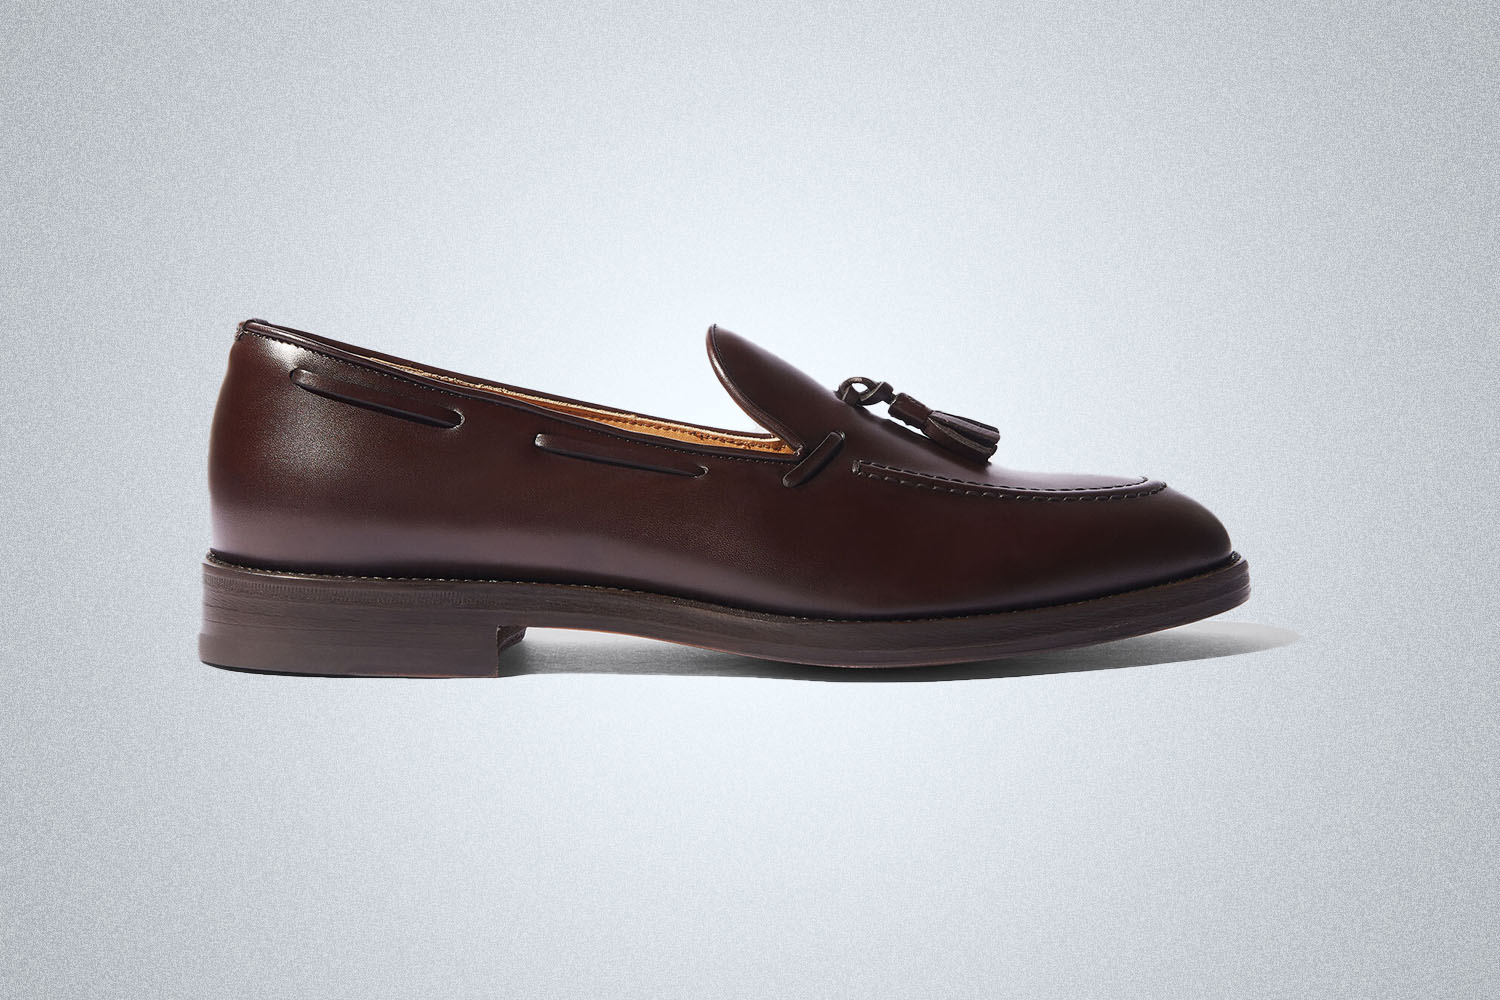 A pair of brown leather summer loafers from Scarosso on a grey background 